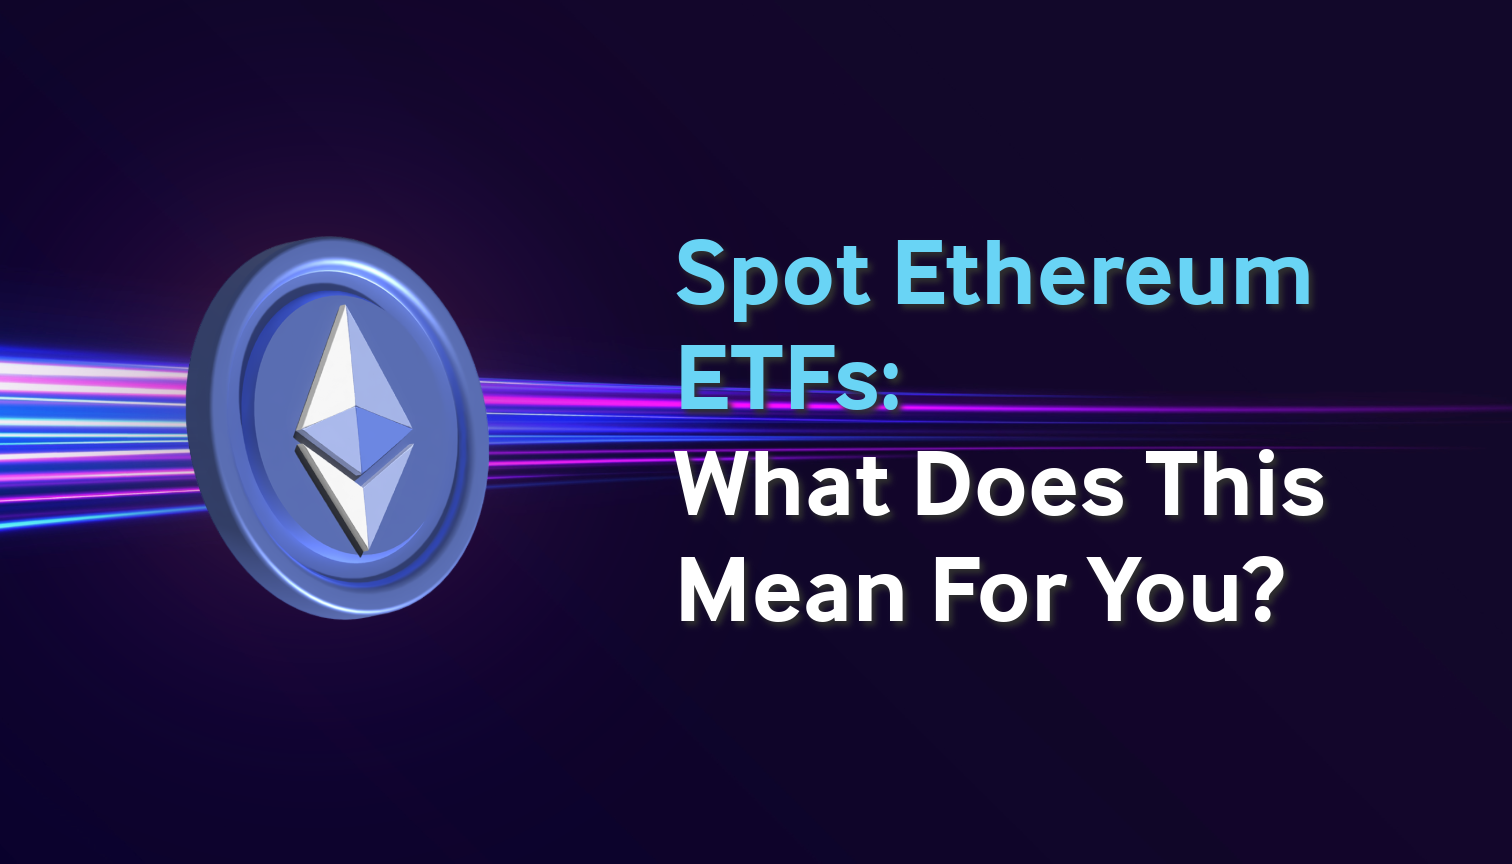 Spot Ethereum ETFs: What Does It Mean For You